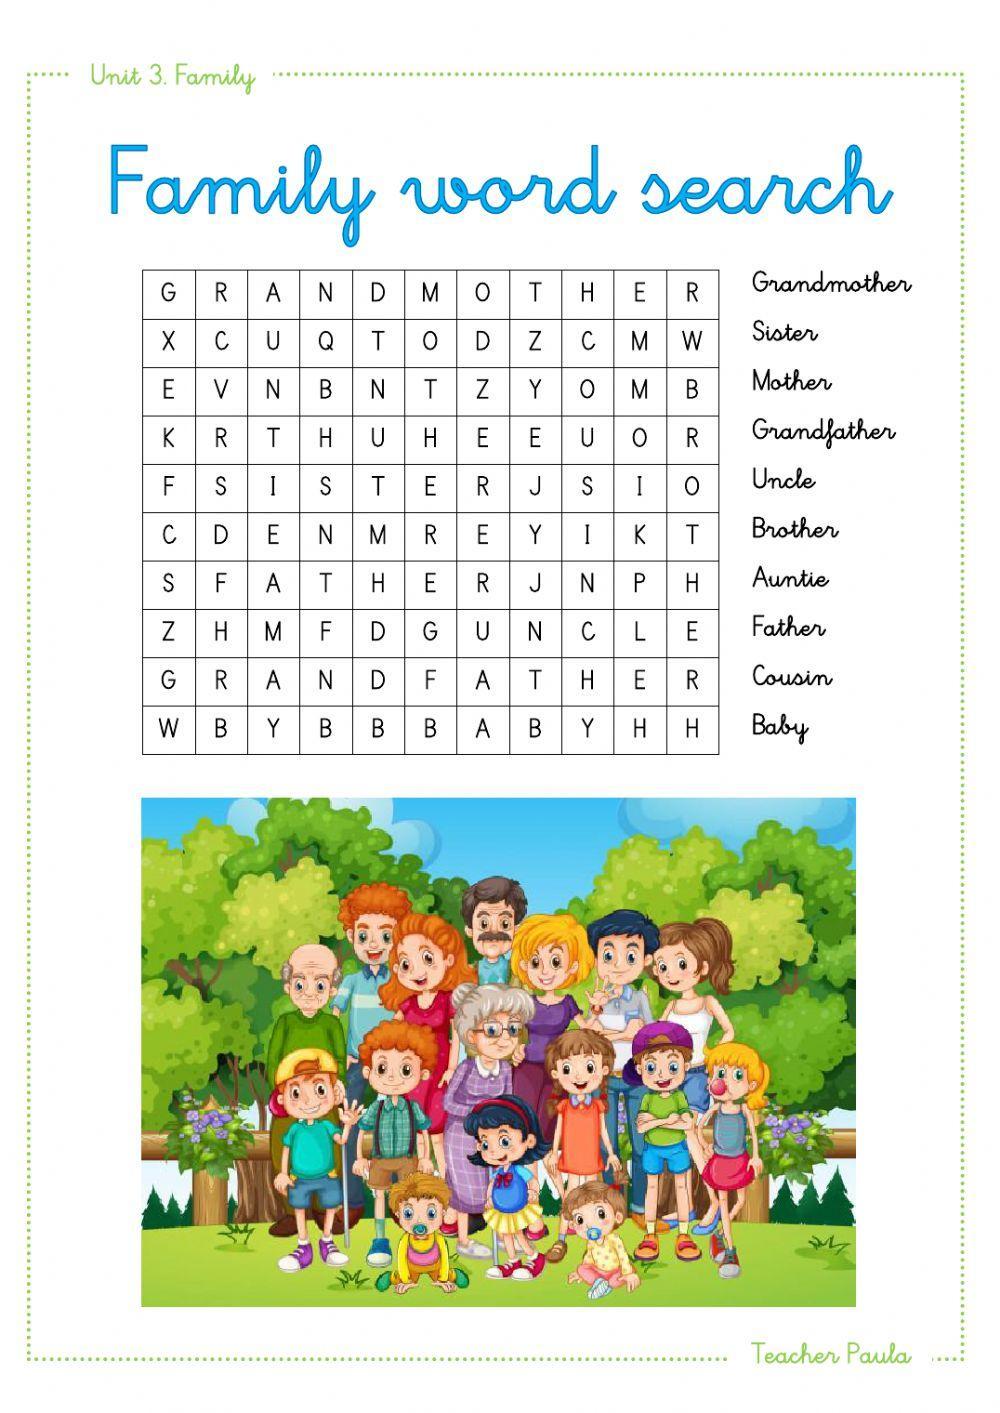 Family members word search